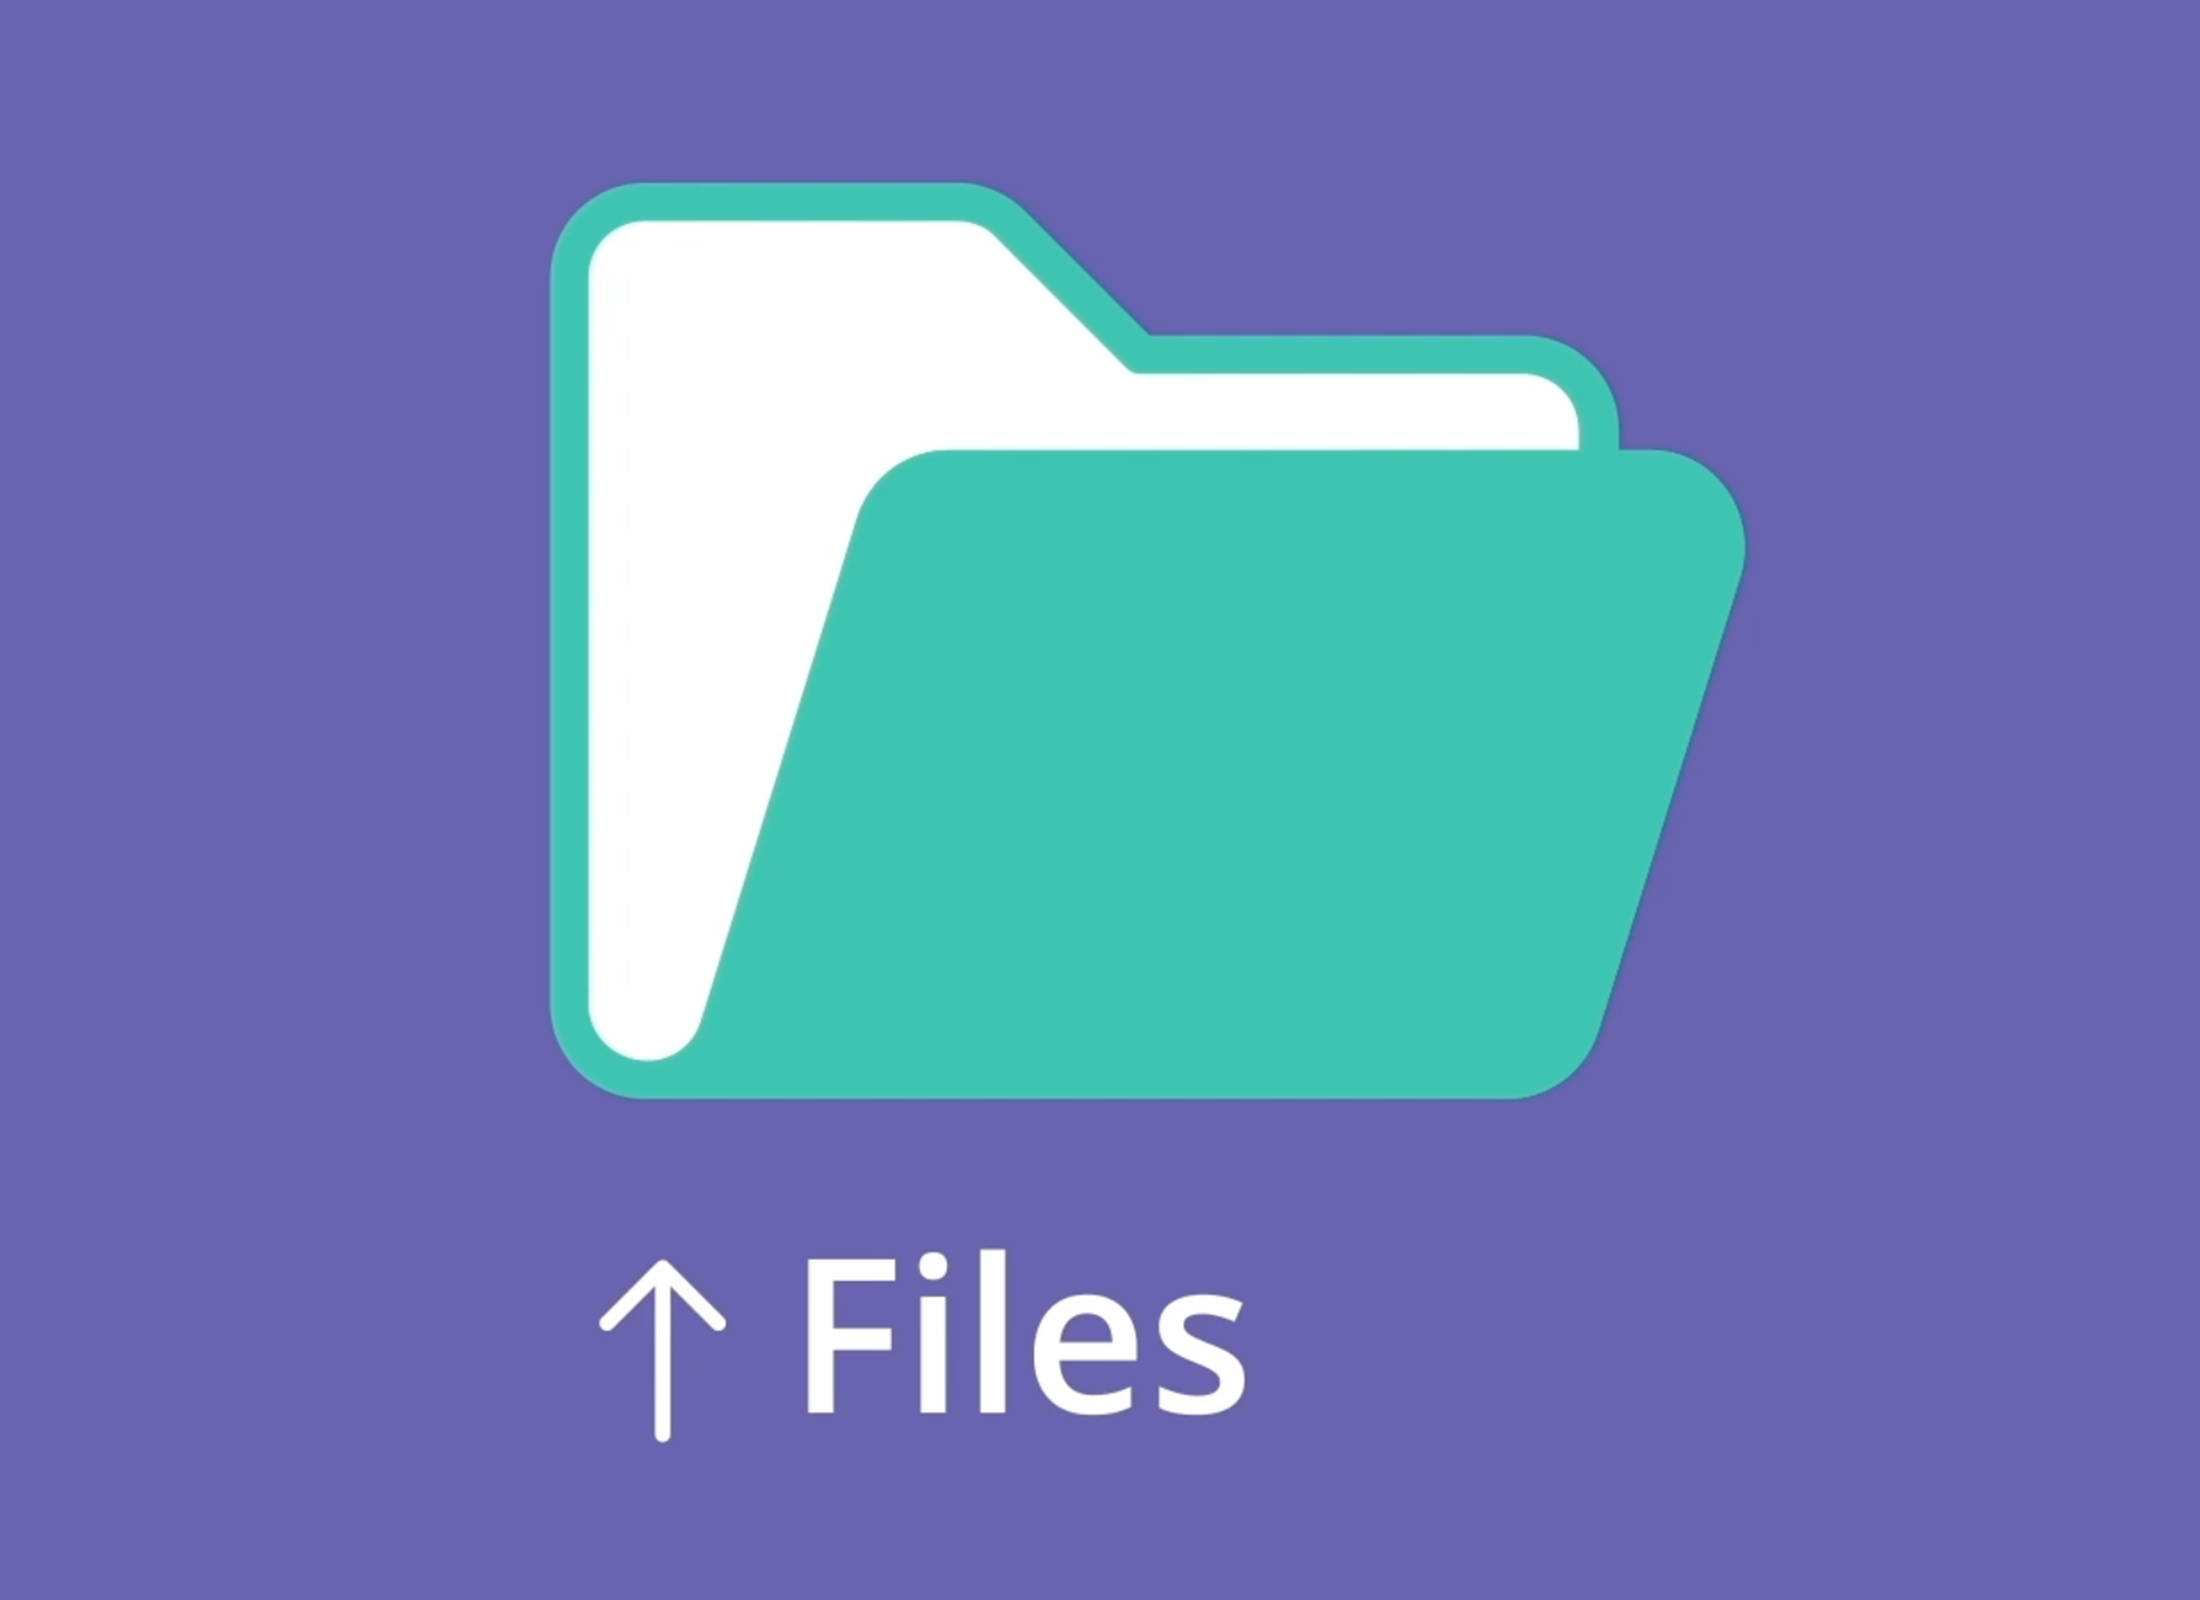 Files help organise your documents